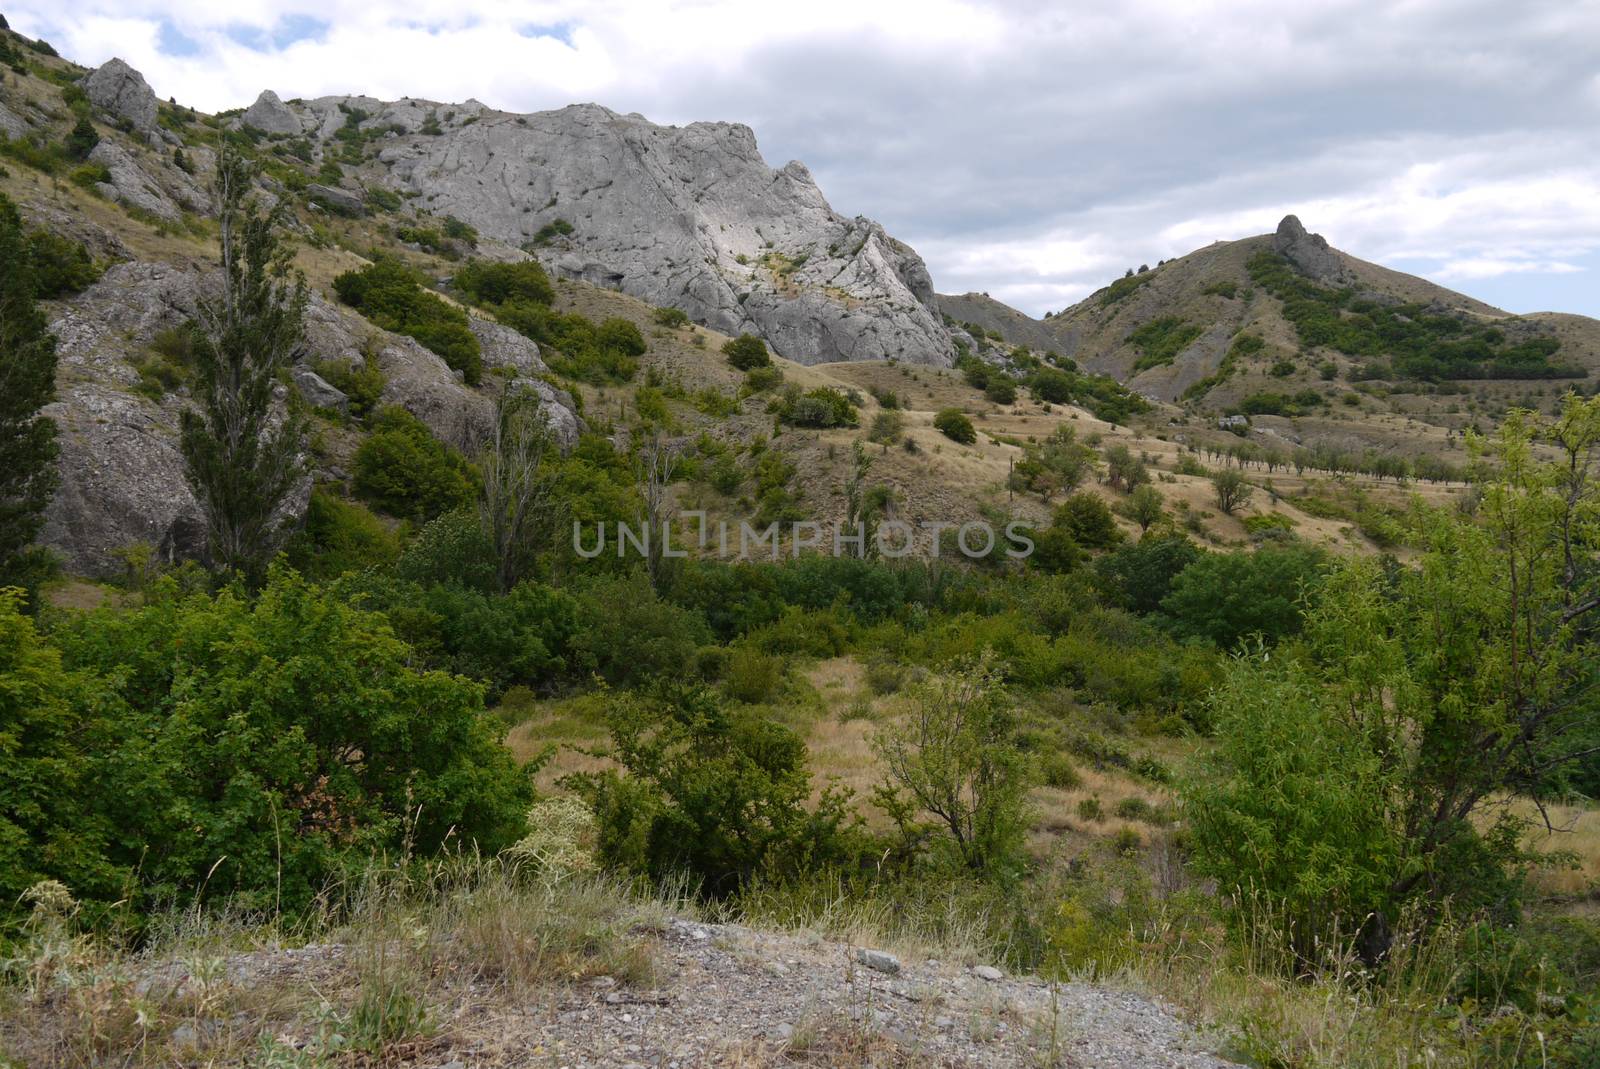 green living bushes and dry grass at the foot of a rocky mountain